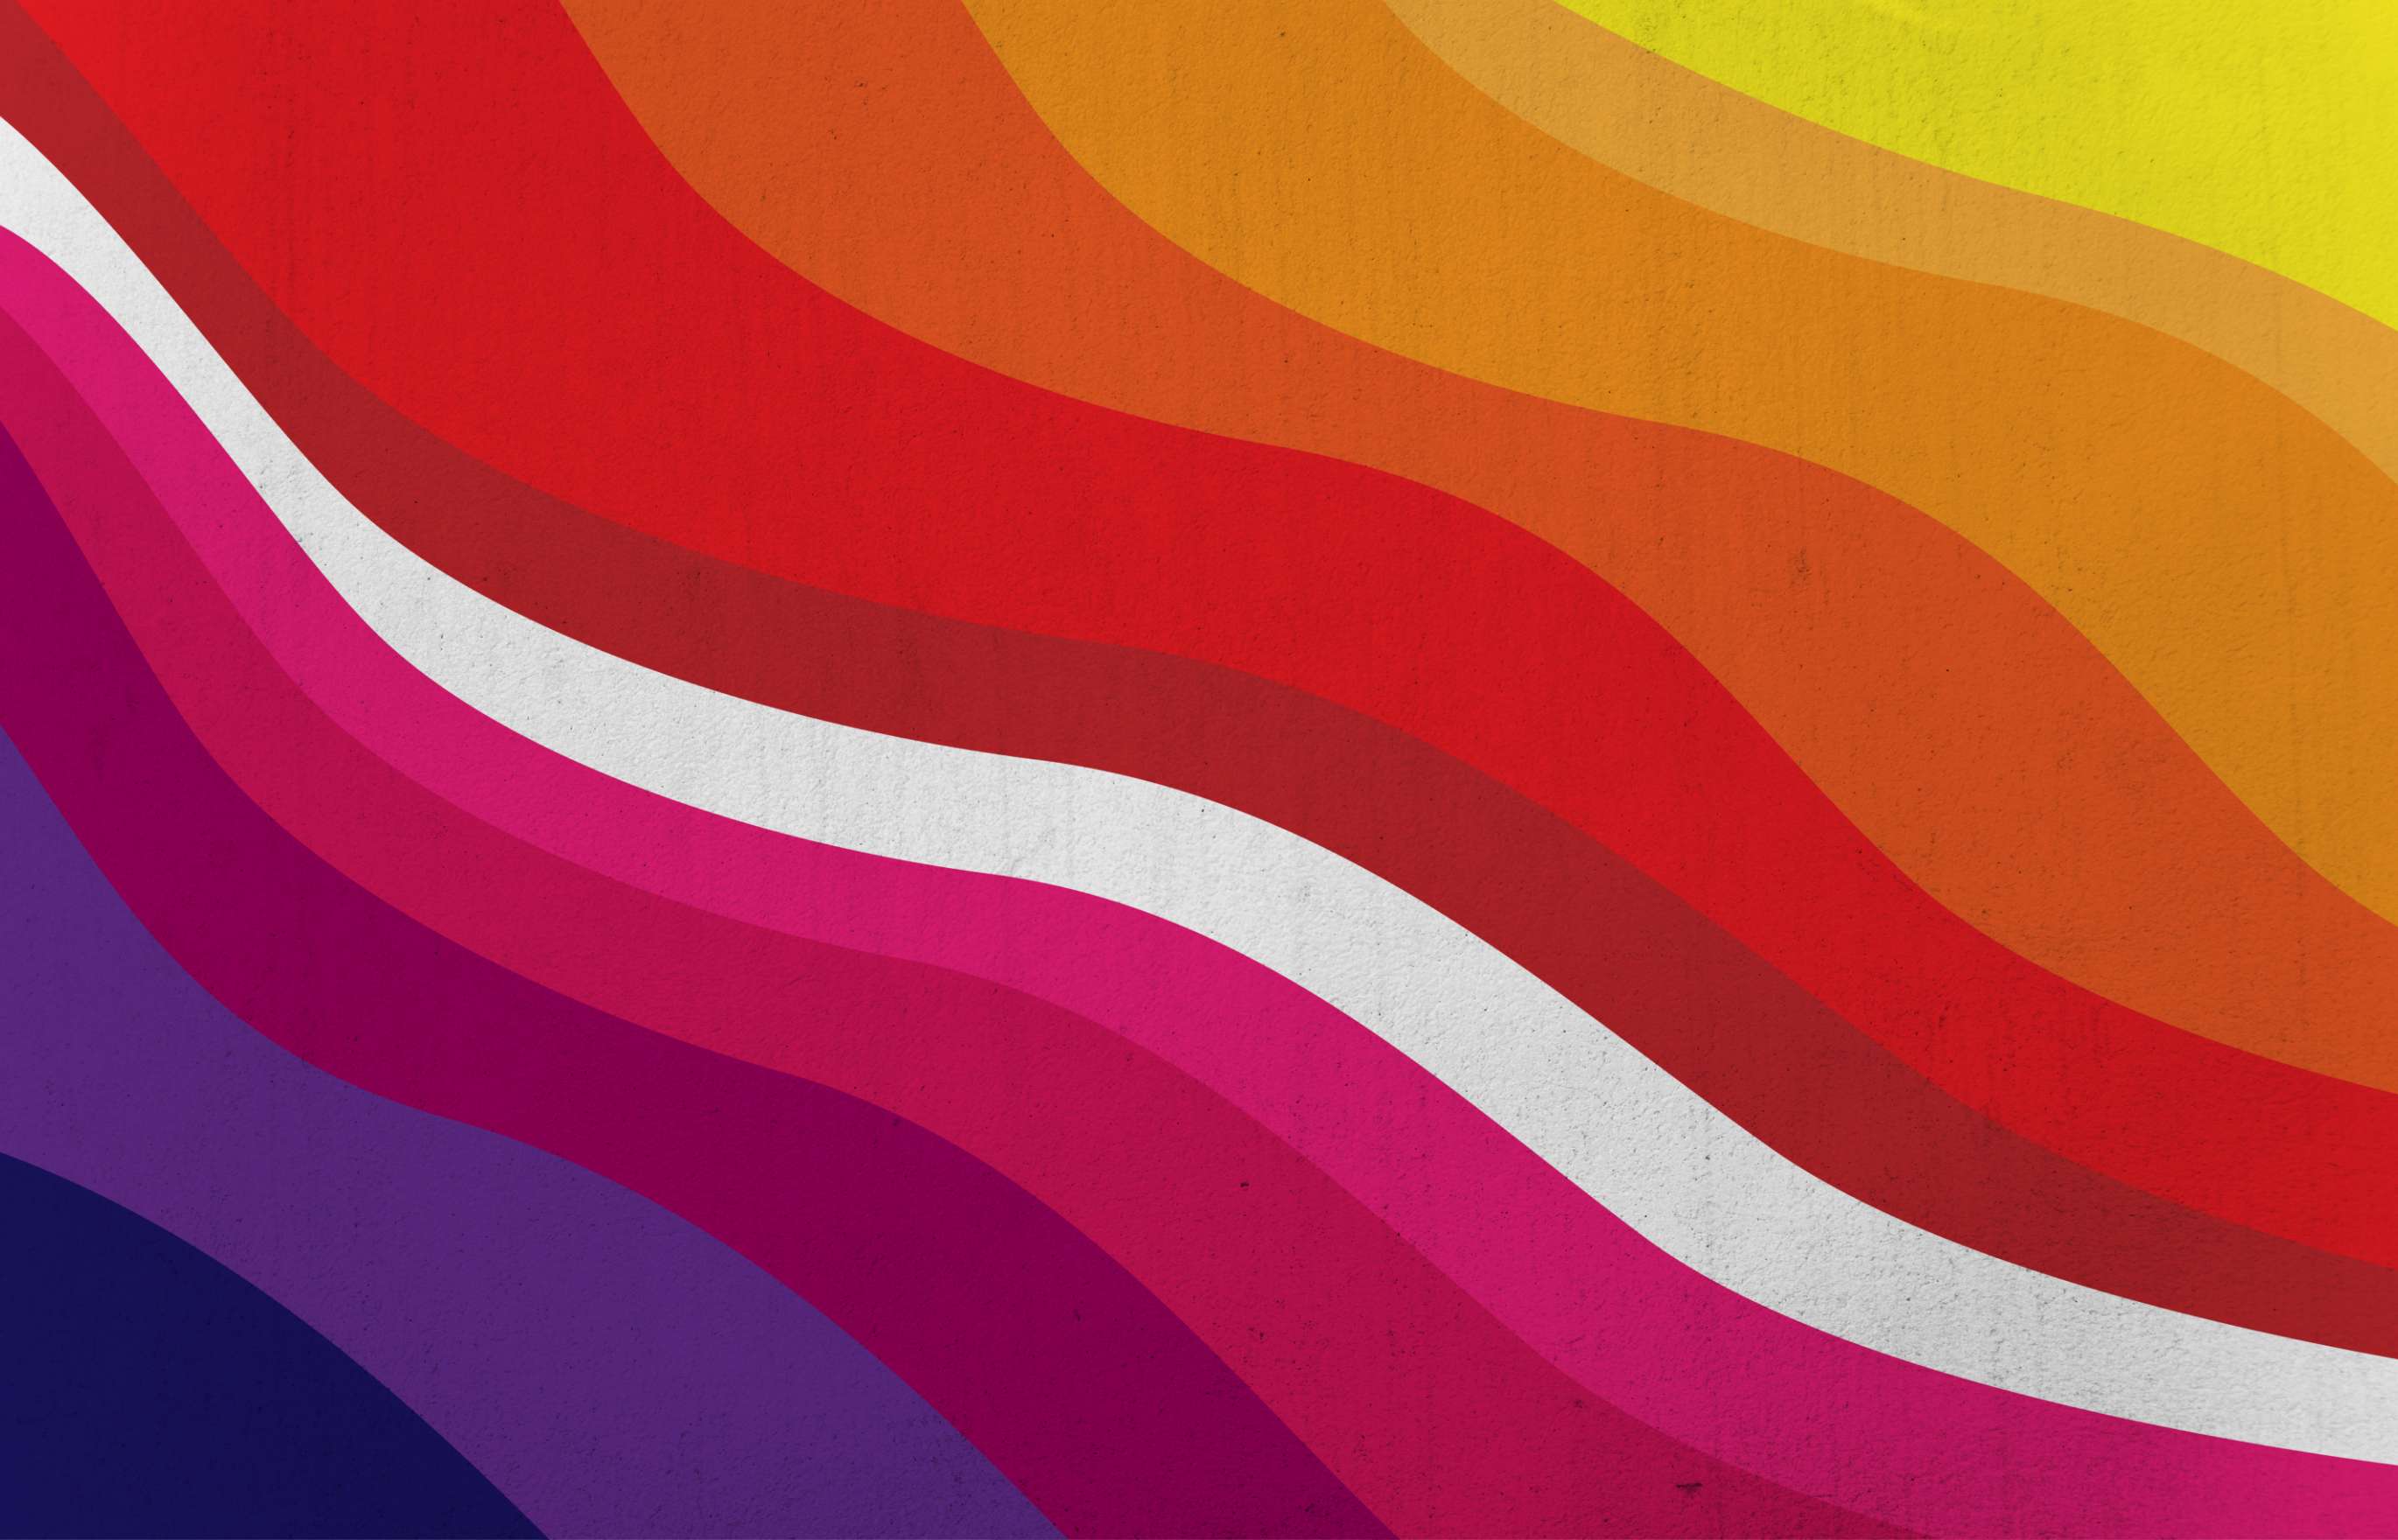 An abstract illustration of diagonally aligned parallel waves of color that move gradually through a gradient from deep purple to yellow, with a single white wave in the middle.